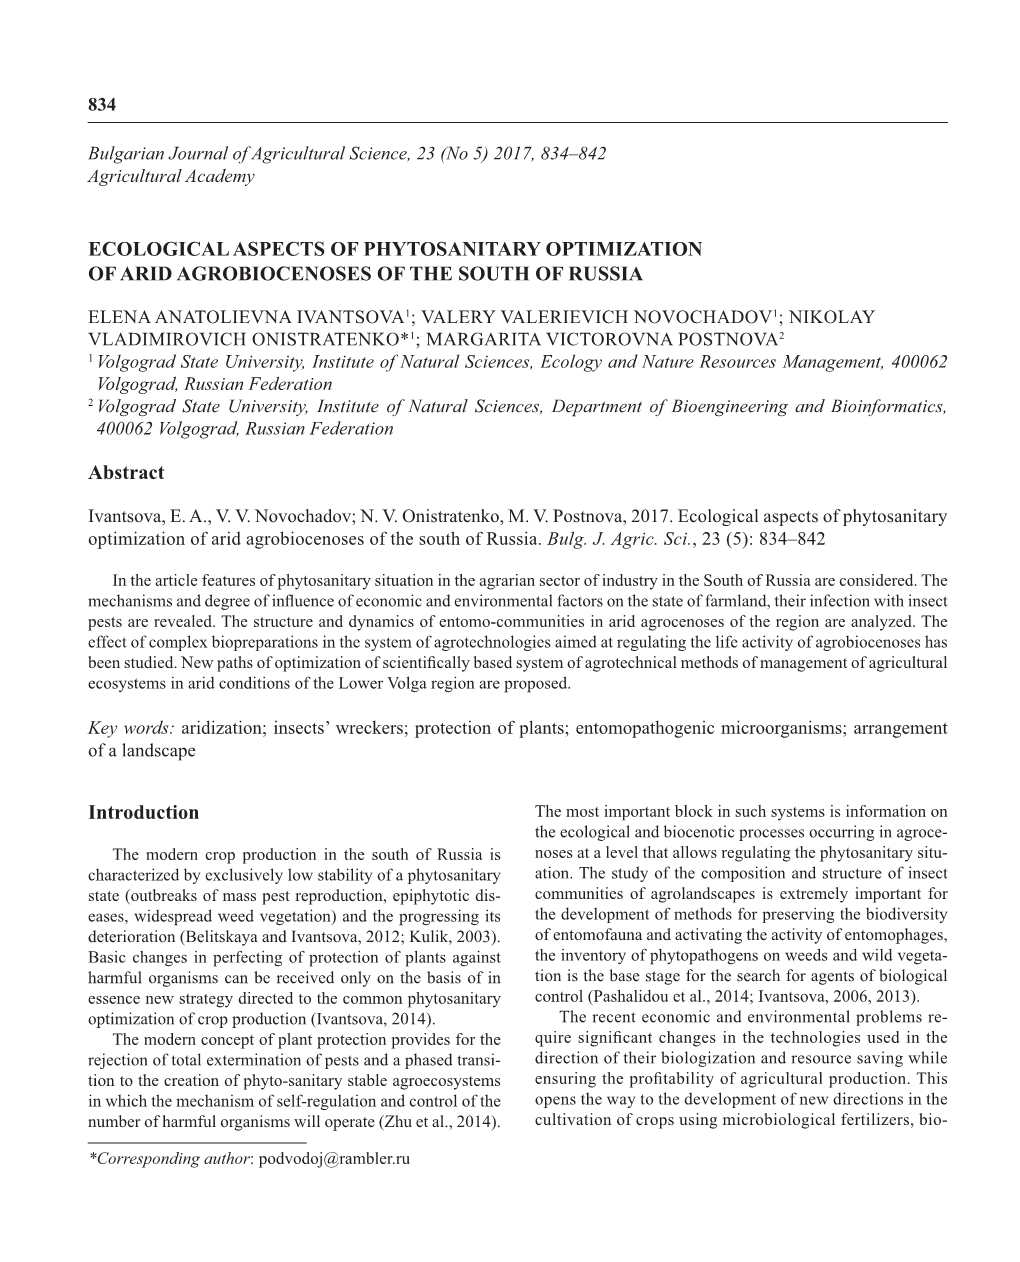 Ecological Aspects of Phytosanitary Optimization of Arid Agrobiocenoses of the South of Russia